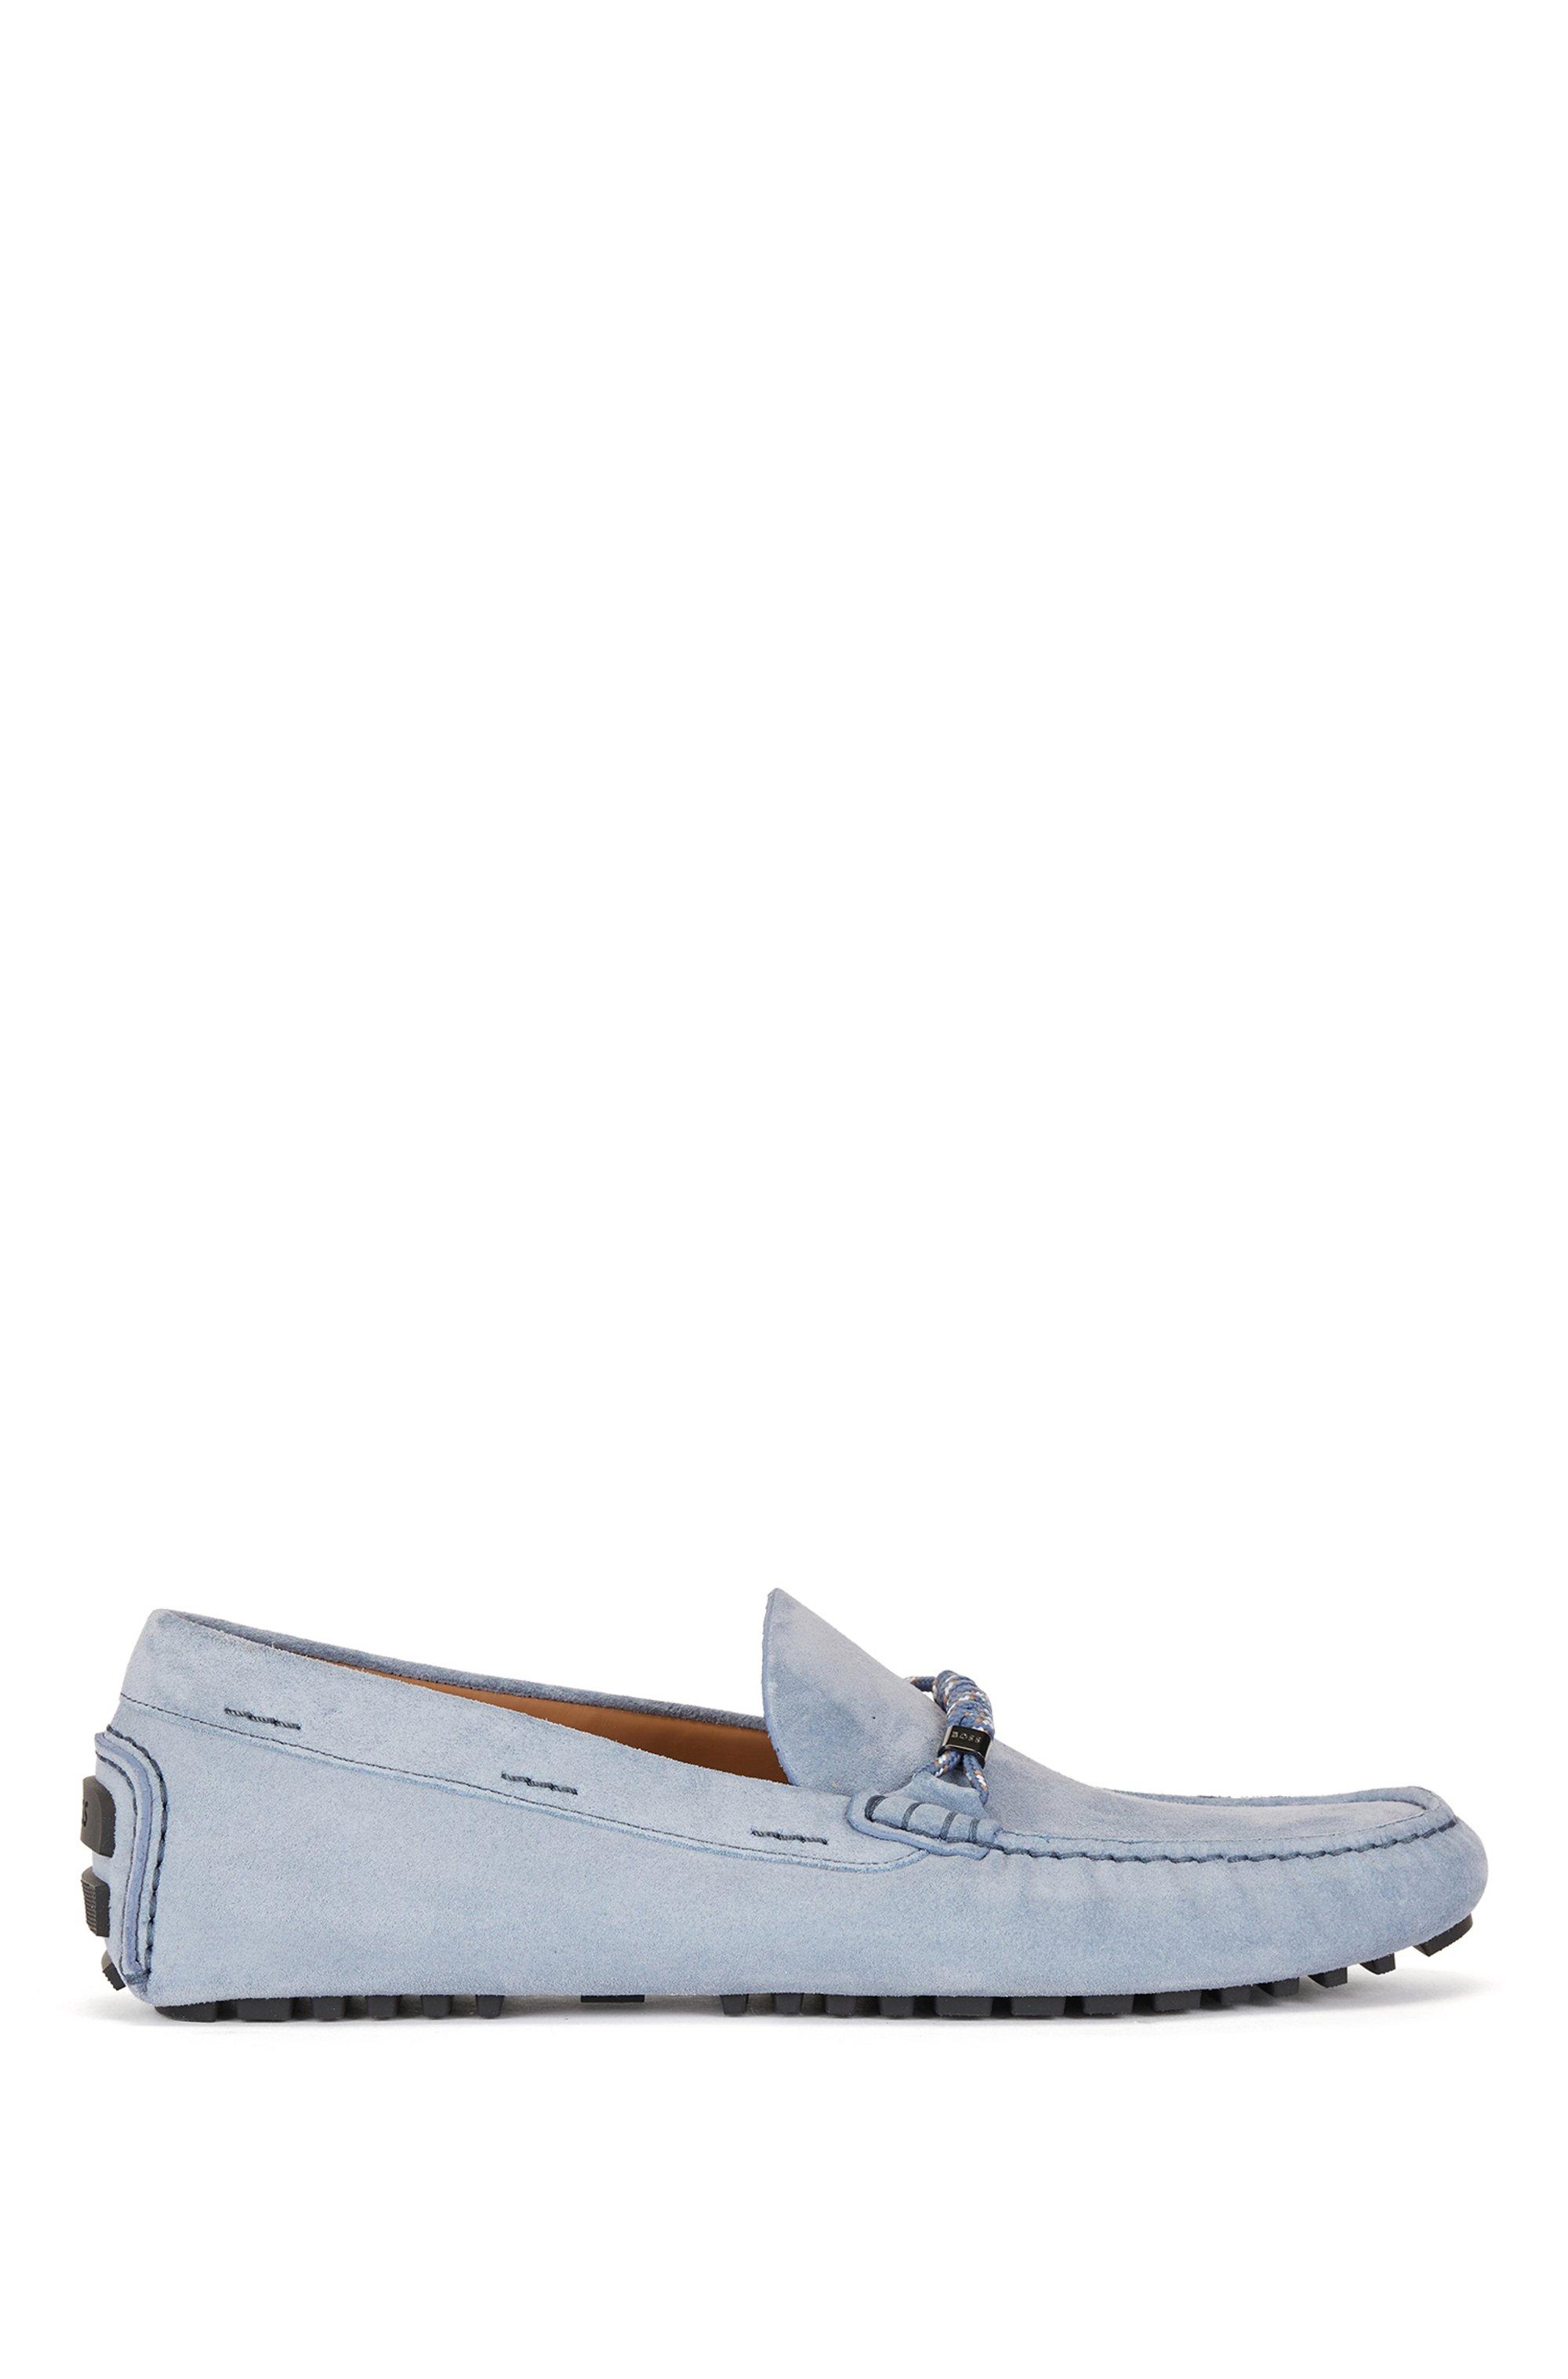 for Men Save 5% Black BOSS by HUGO BOSS Suede Moccasins Trainers in Blue Mens Slip-on shoes BOSS by HUGO BOSS Slip-on shoes 